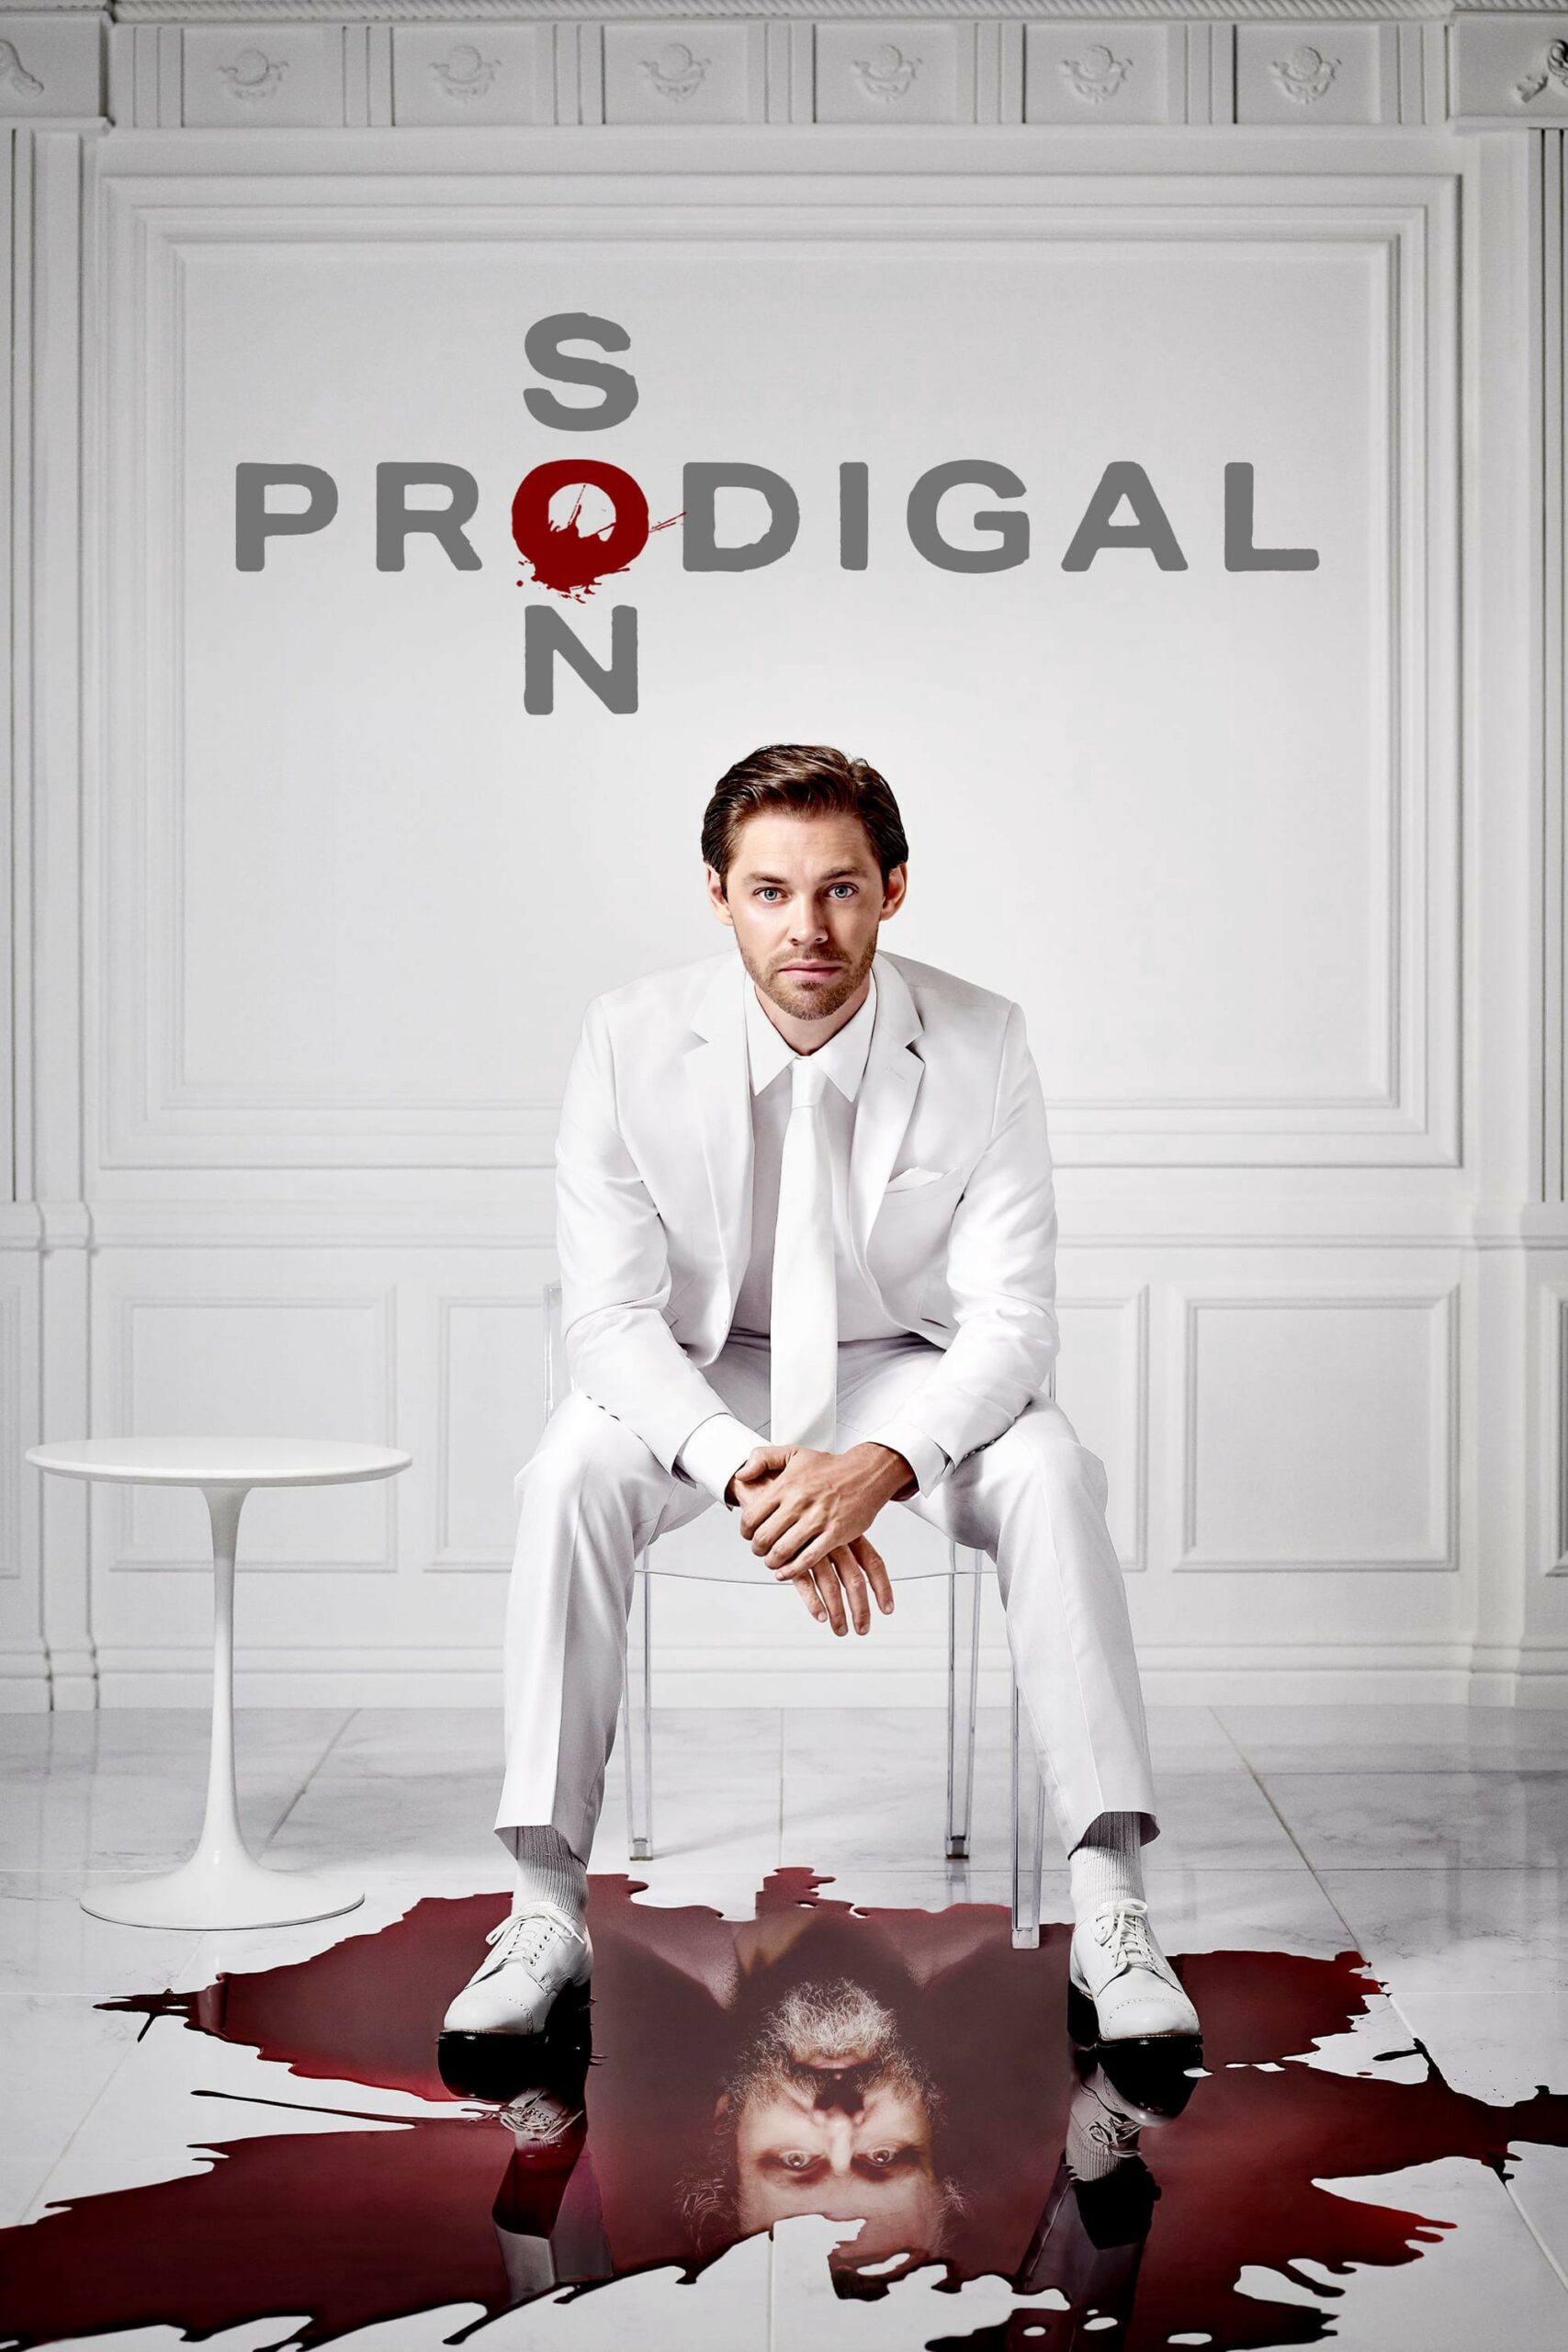 Prodigal son review